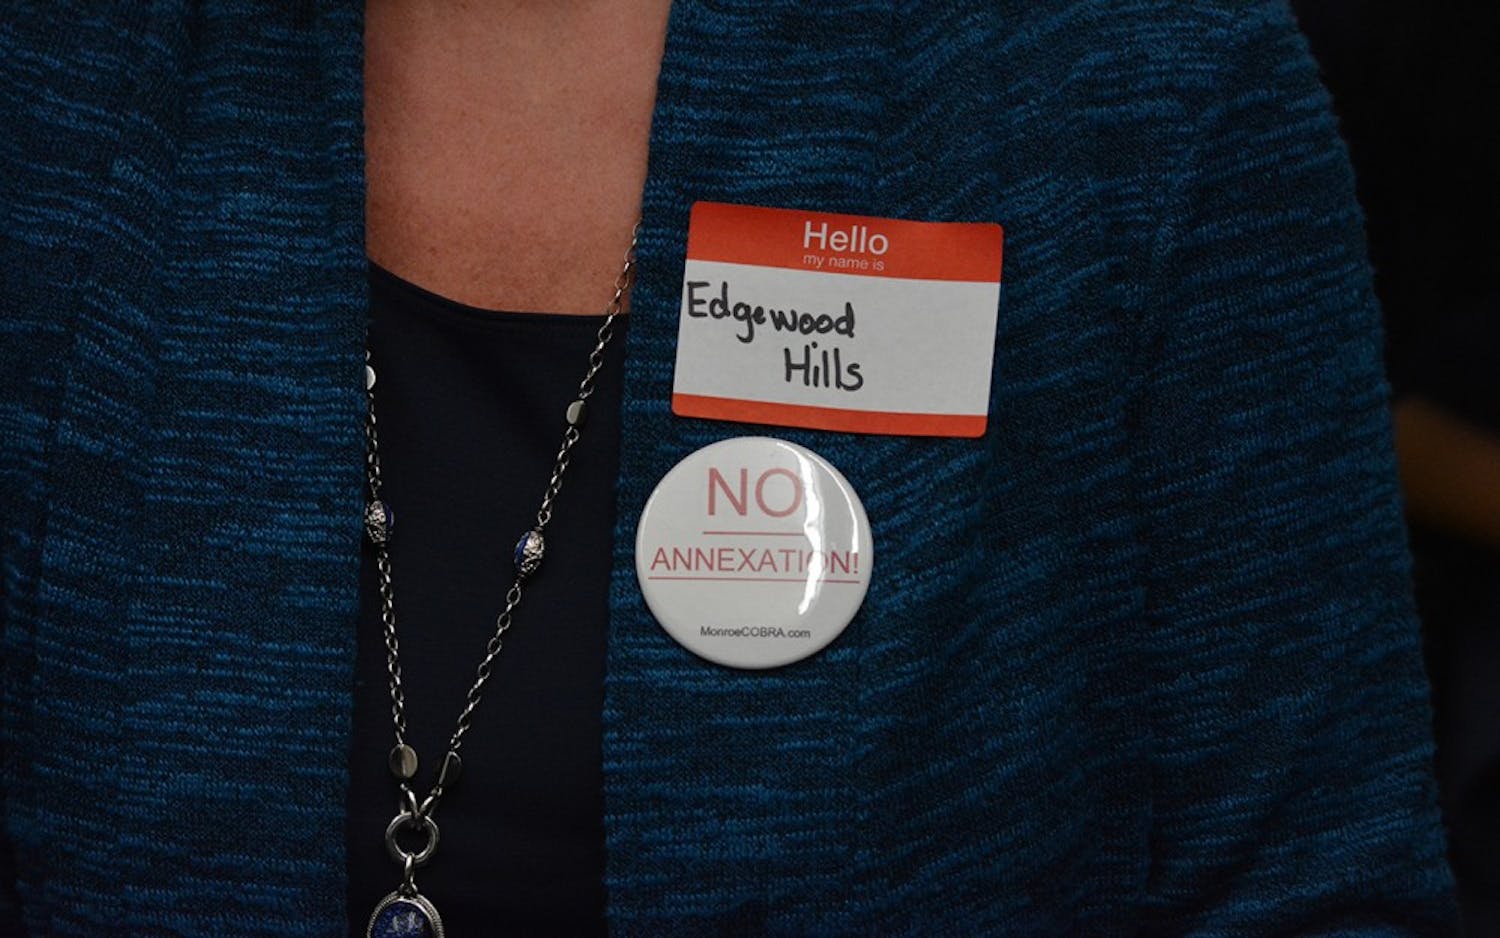 Alison Evans, a resident of Edgewood Hills in annexation area two, wears a pin to protest the proposed new boundaries of Bloomington. Evans was one of about 50 township residents who came Wednesday night's city council meeting.